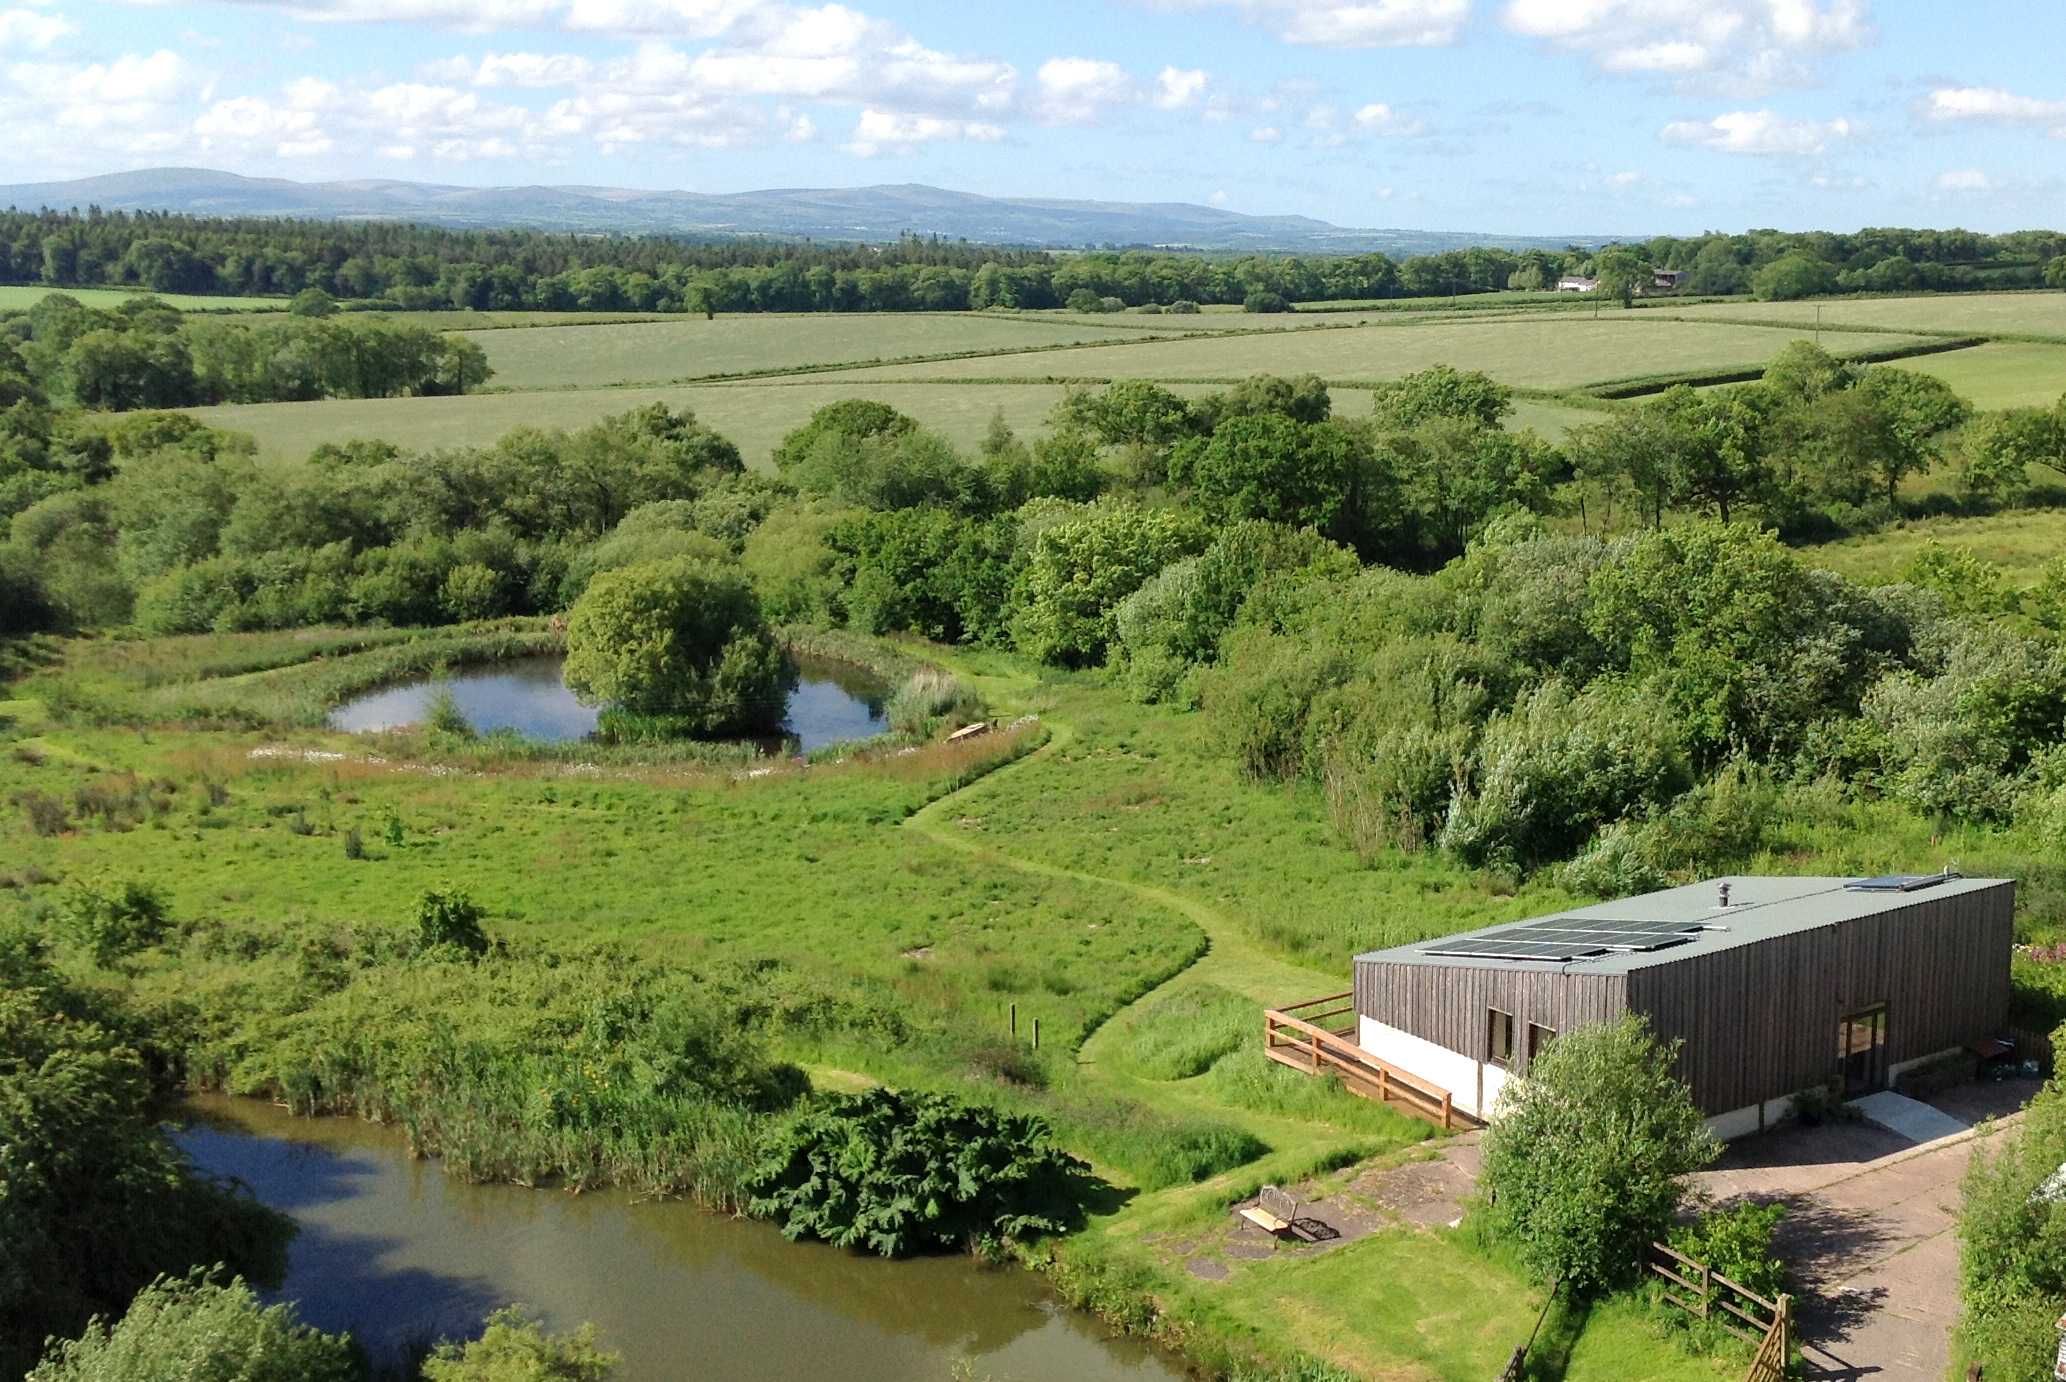 An aerial view shows a wheelchair accessible cabin looking over a meadow, with a step free path to a fishing pond